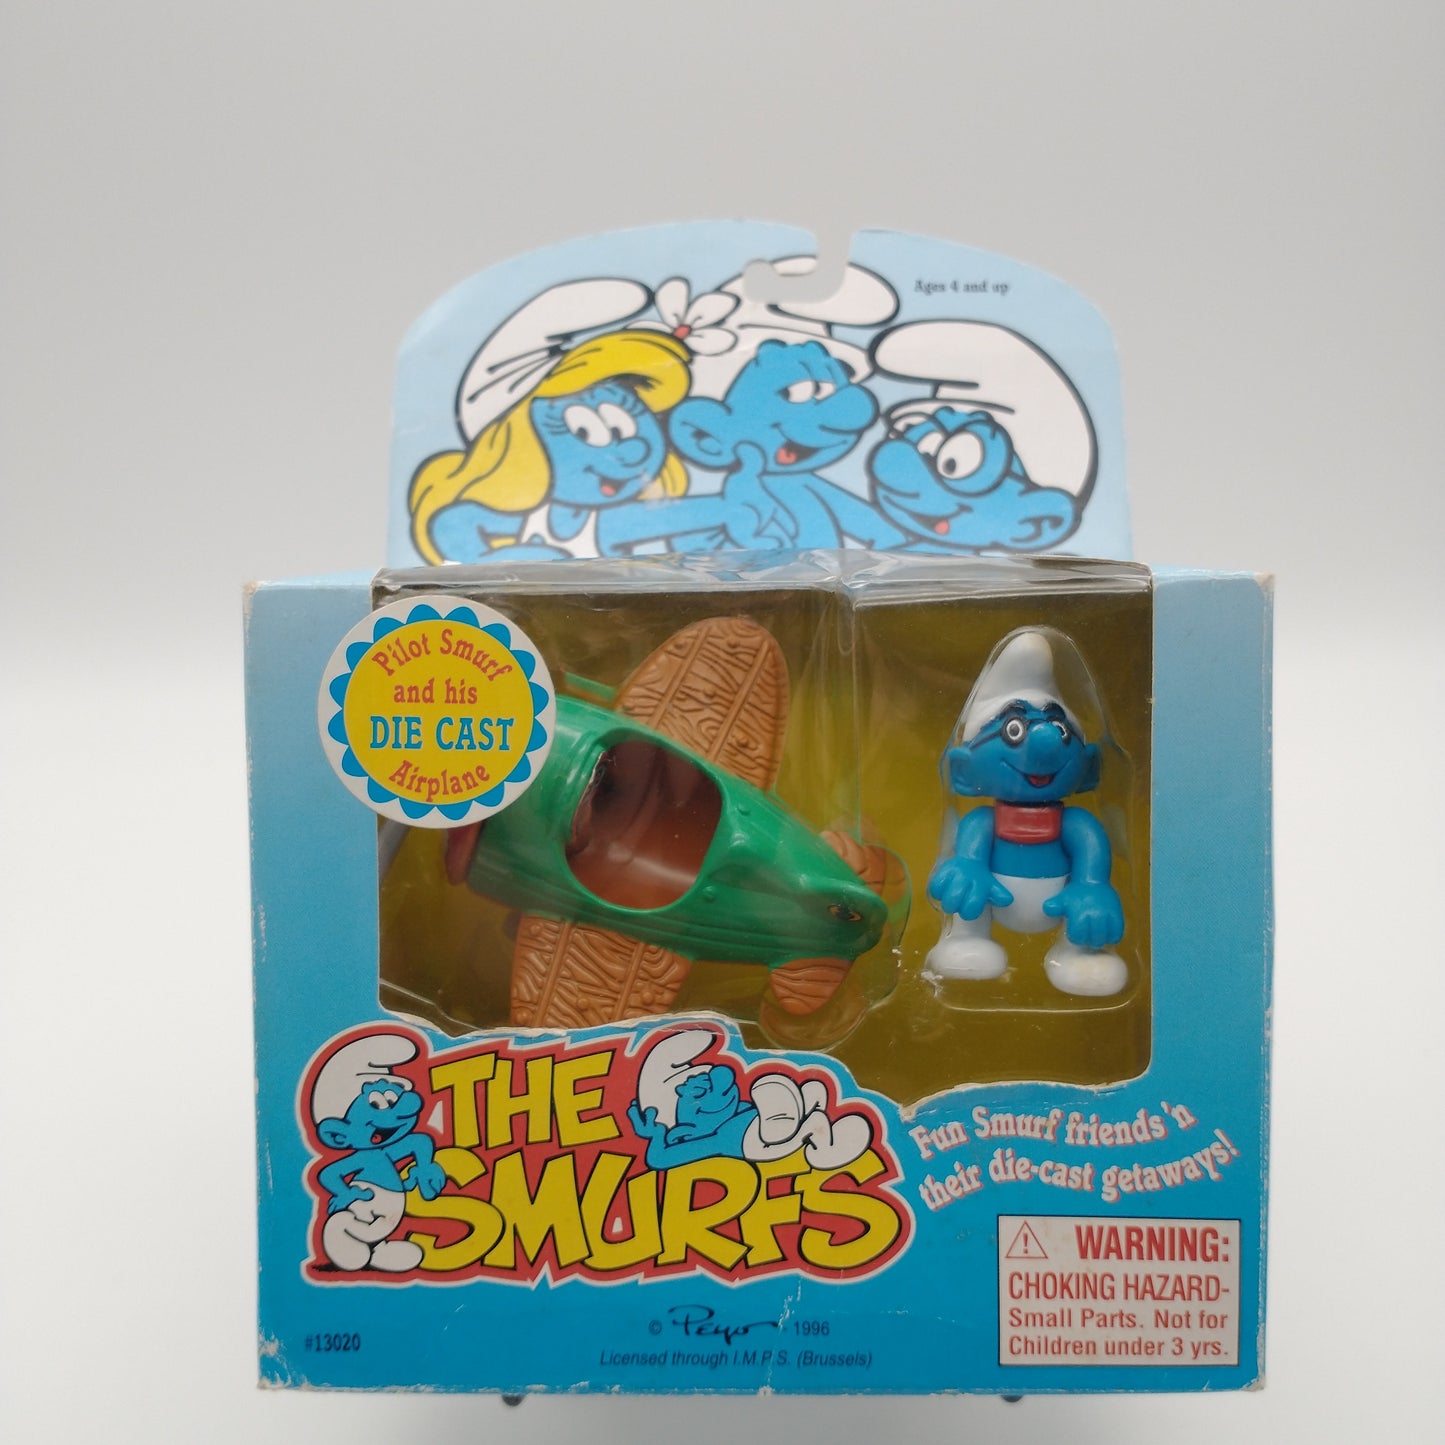 The front of the card and bubble. The figure is sealed inside.